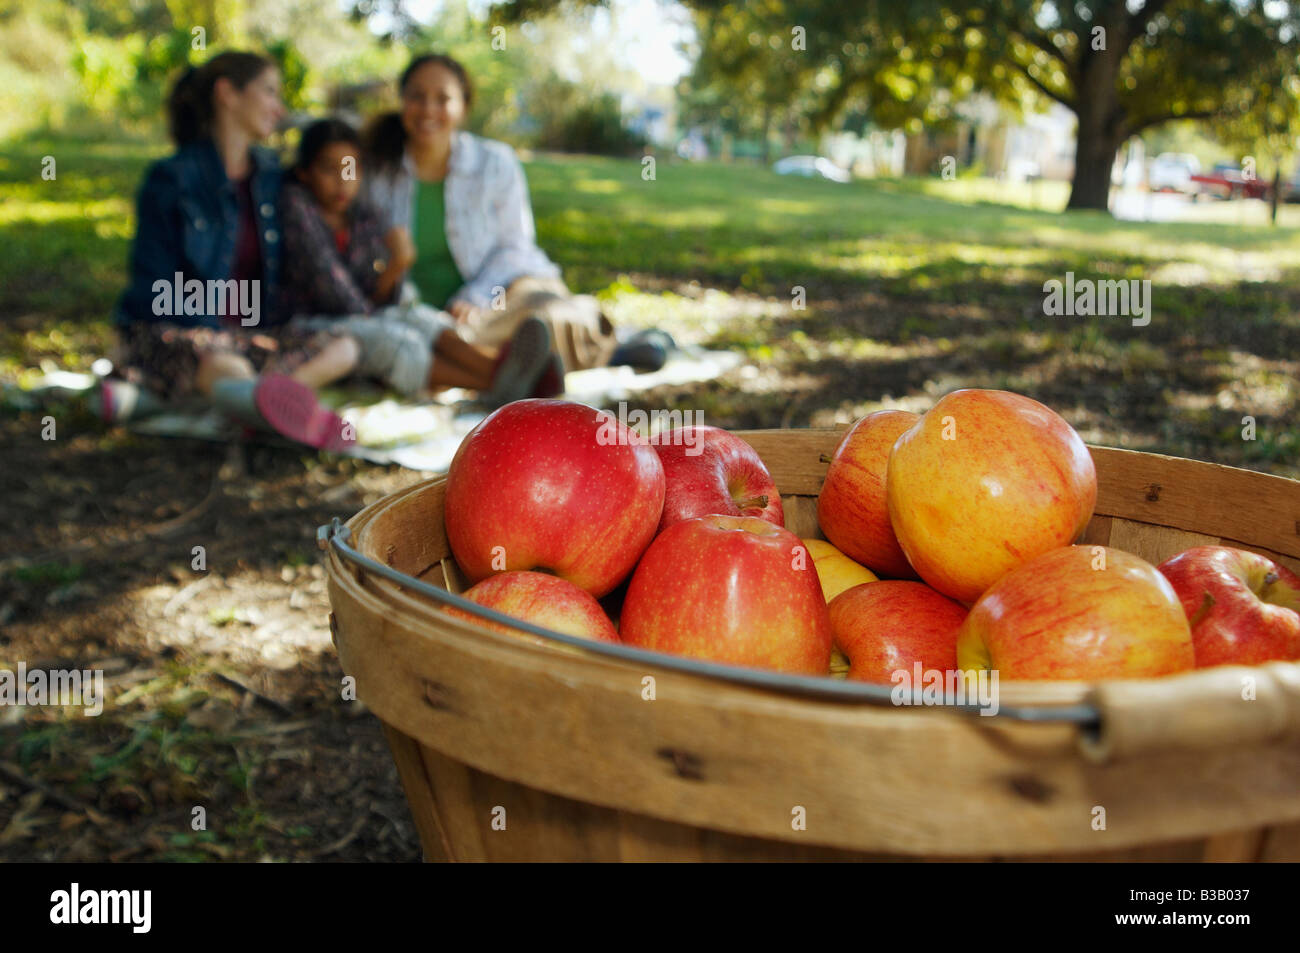 Basket of apples with family in background Stock Photo